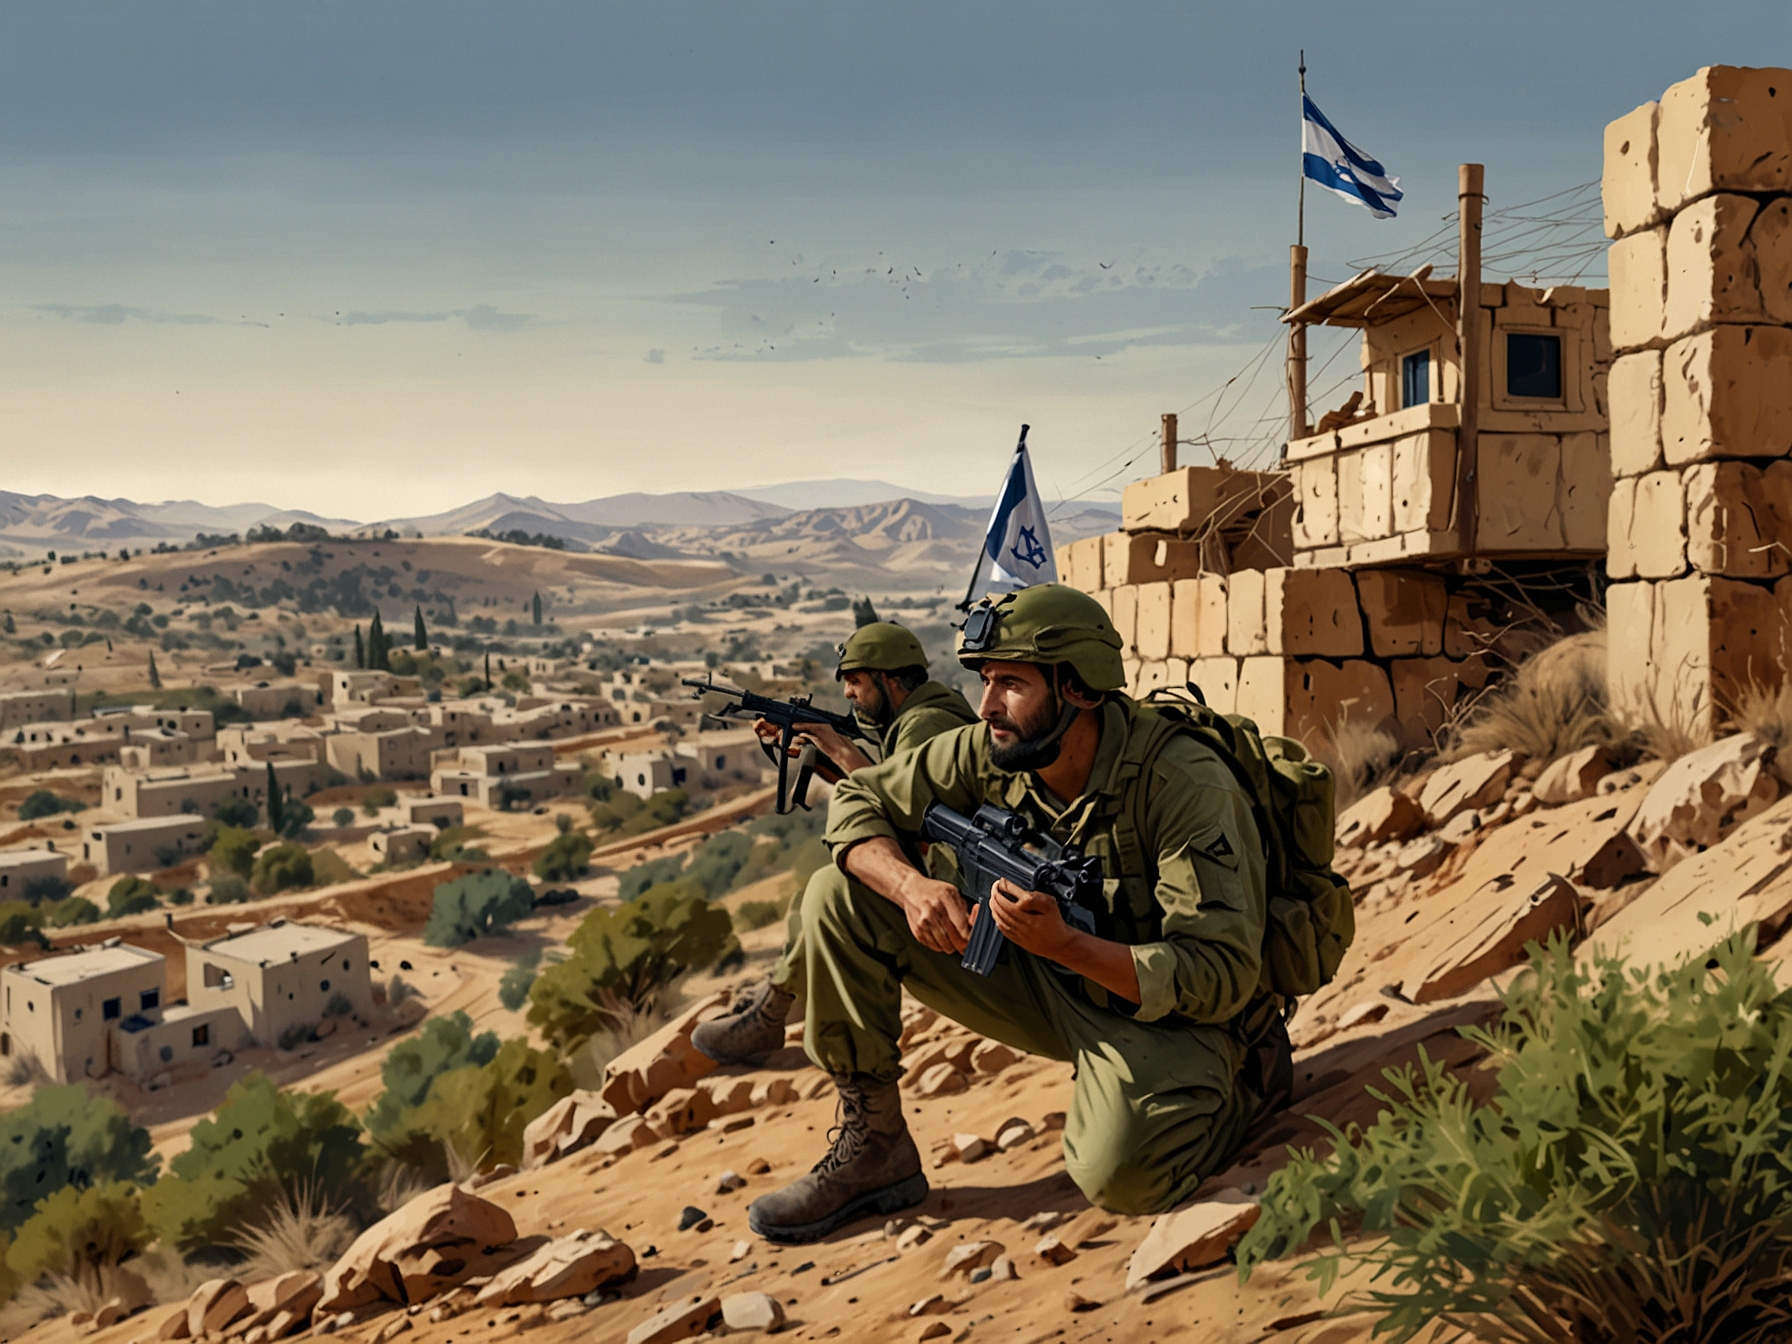 Israeli soldiers on a high alert at the northern border, with fortified positions and advanced surveillance systems, showcasing readiness against potential Hezbollah attacks from Lebanon.